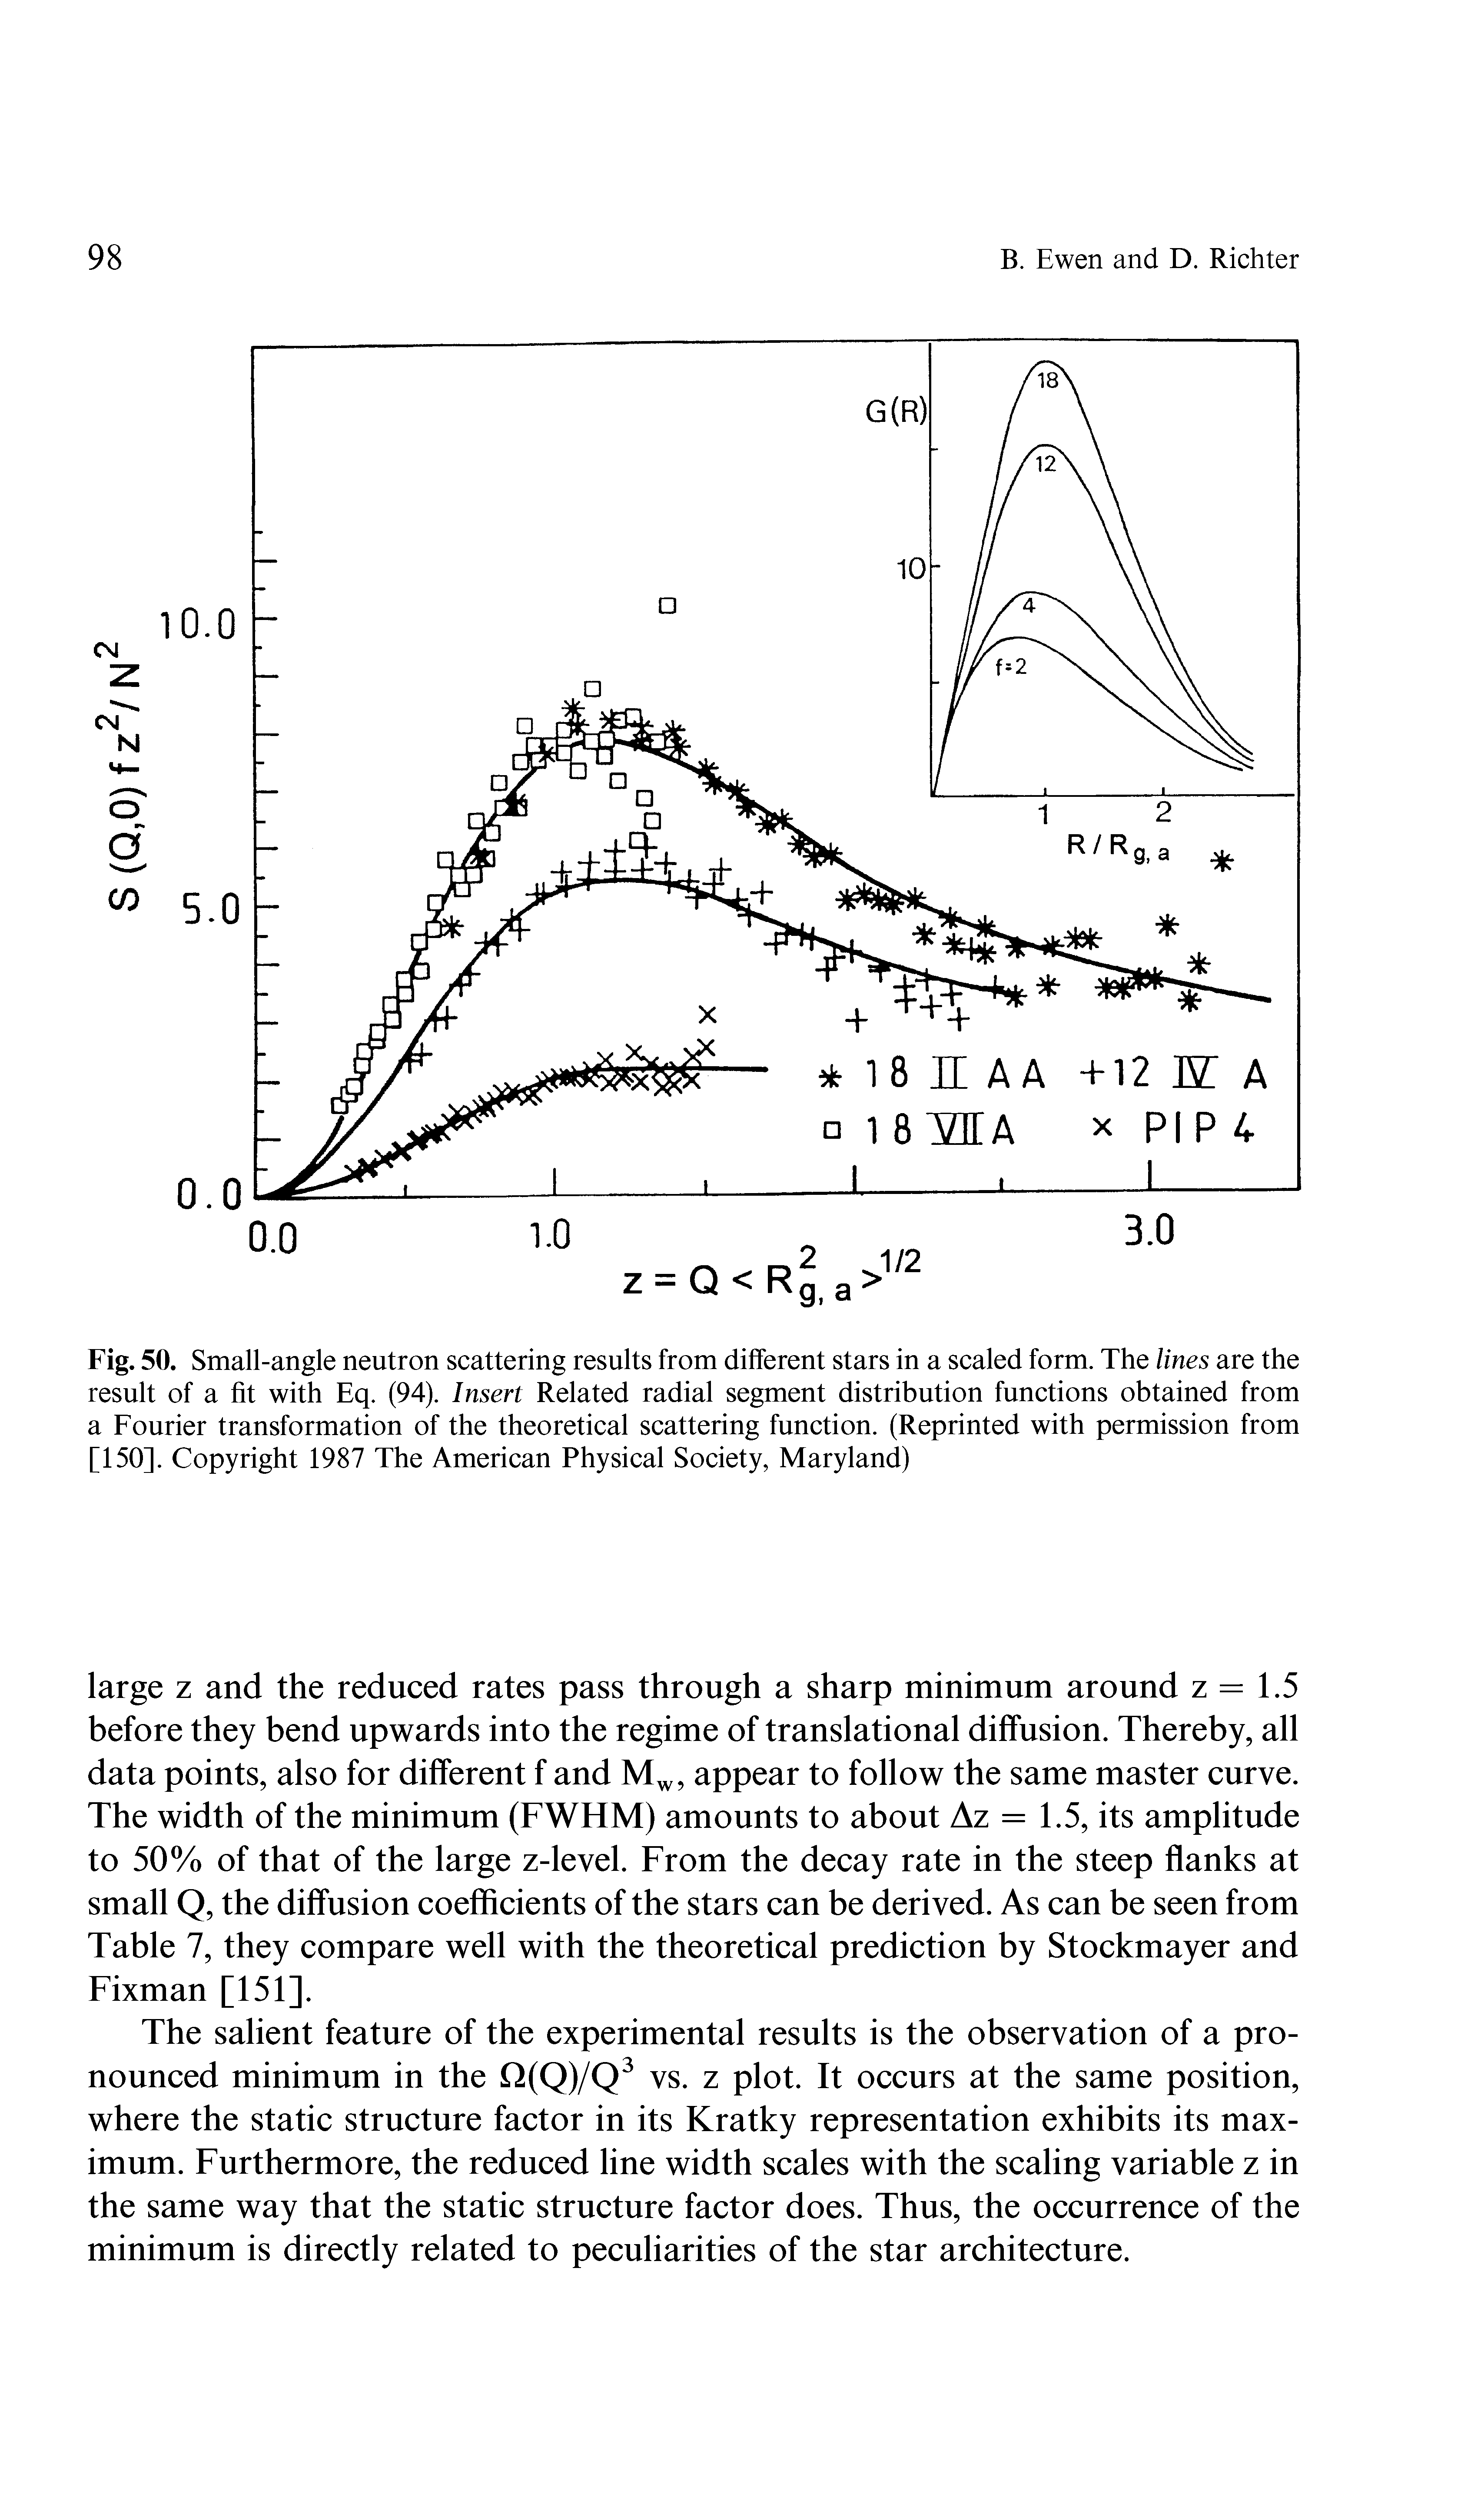 Fig. 50. Small-angle neutron scattering results from different stars in a scaled form. The lines are the result of a fit with Eq. (94). Insert Related radial segment distribution functions obtained from a Fourier transformation of the theoretical scattering function. (Reprinted with permission from [150]. Copyright 1987 The American Physical Society, Maryland)...